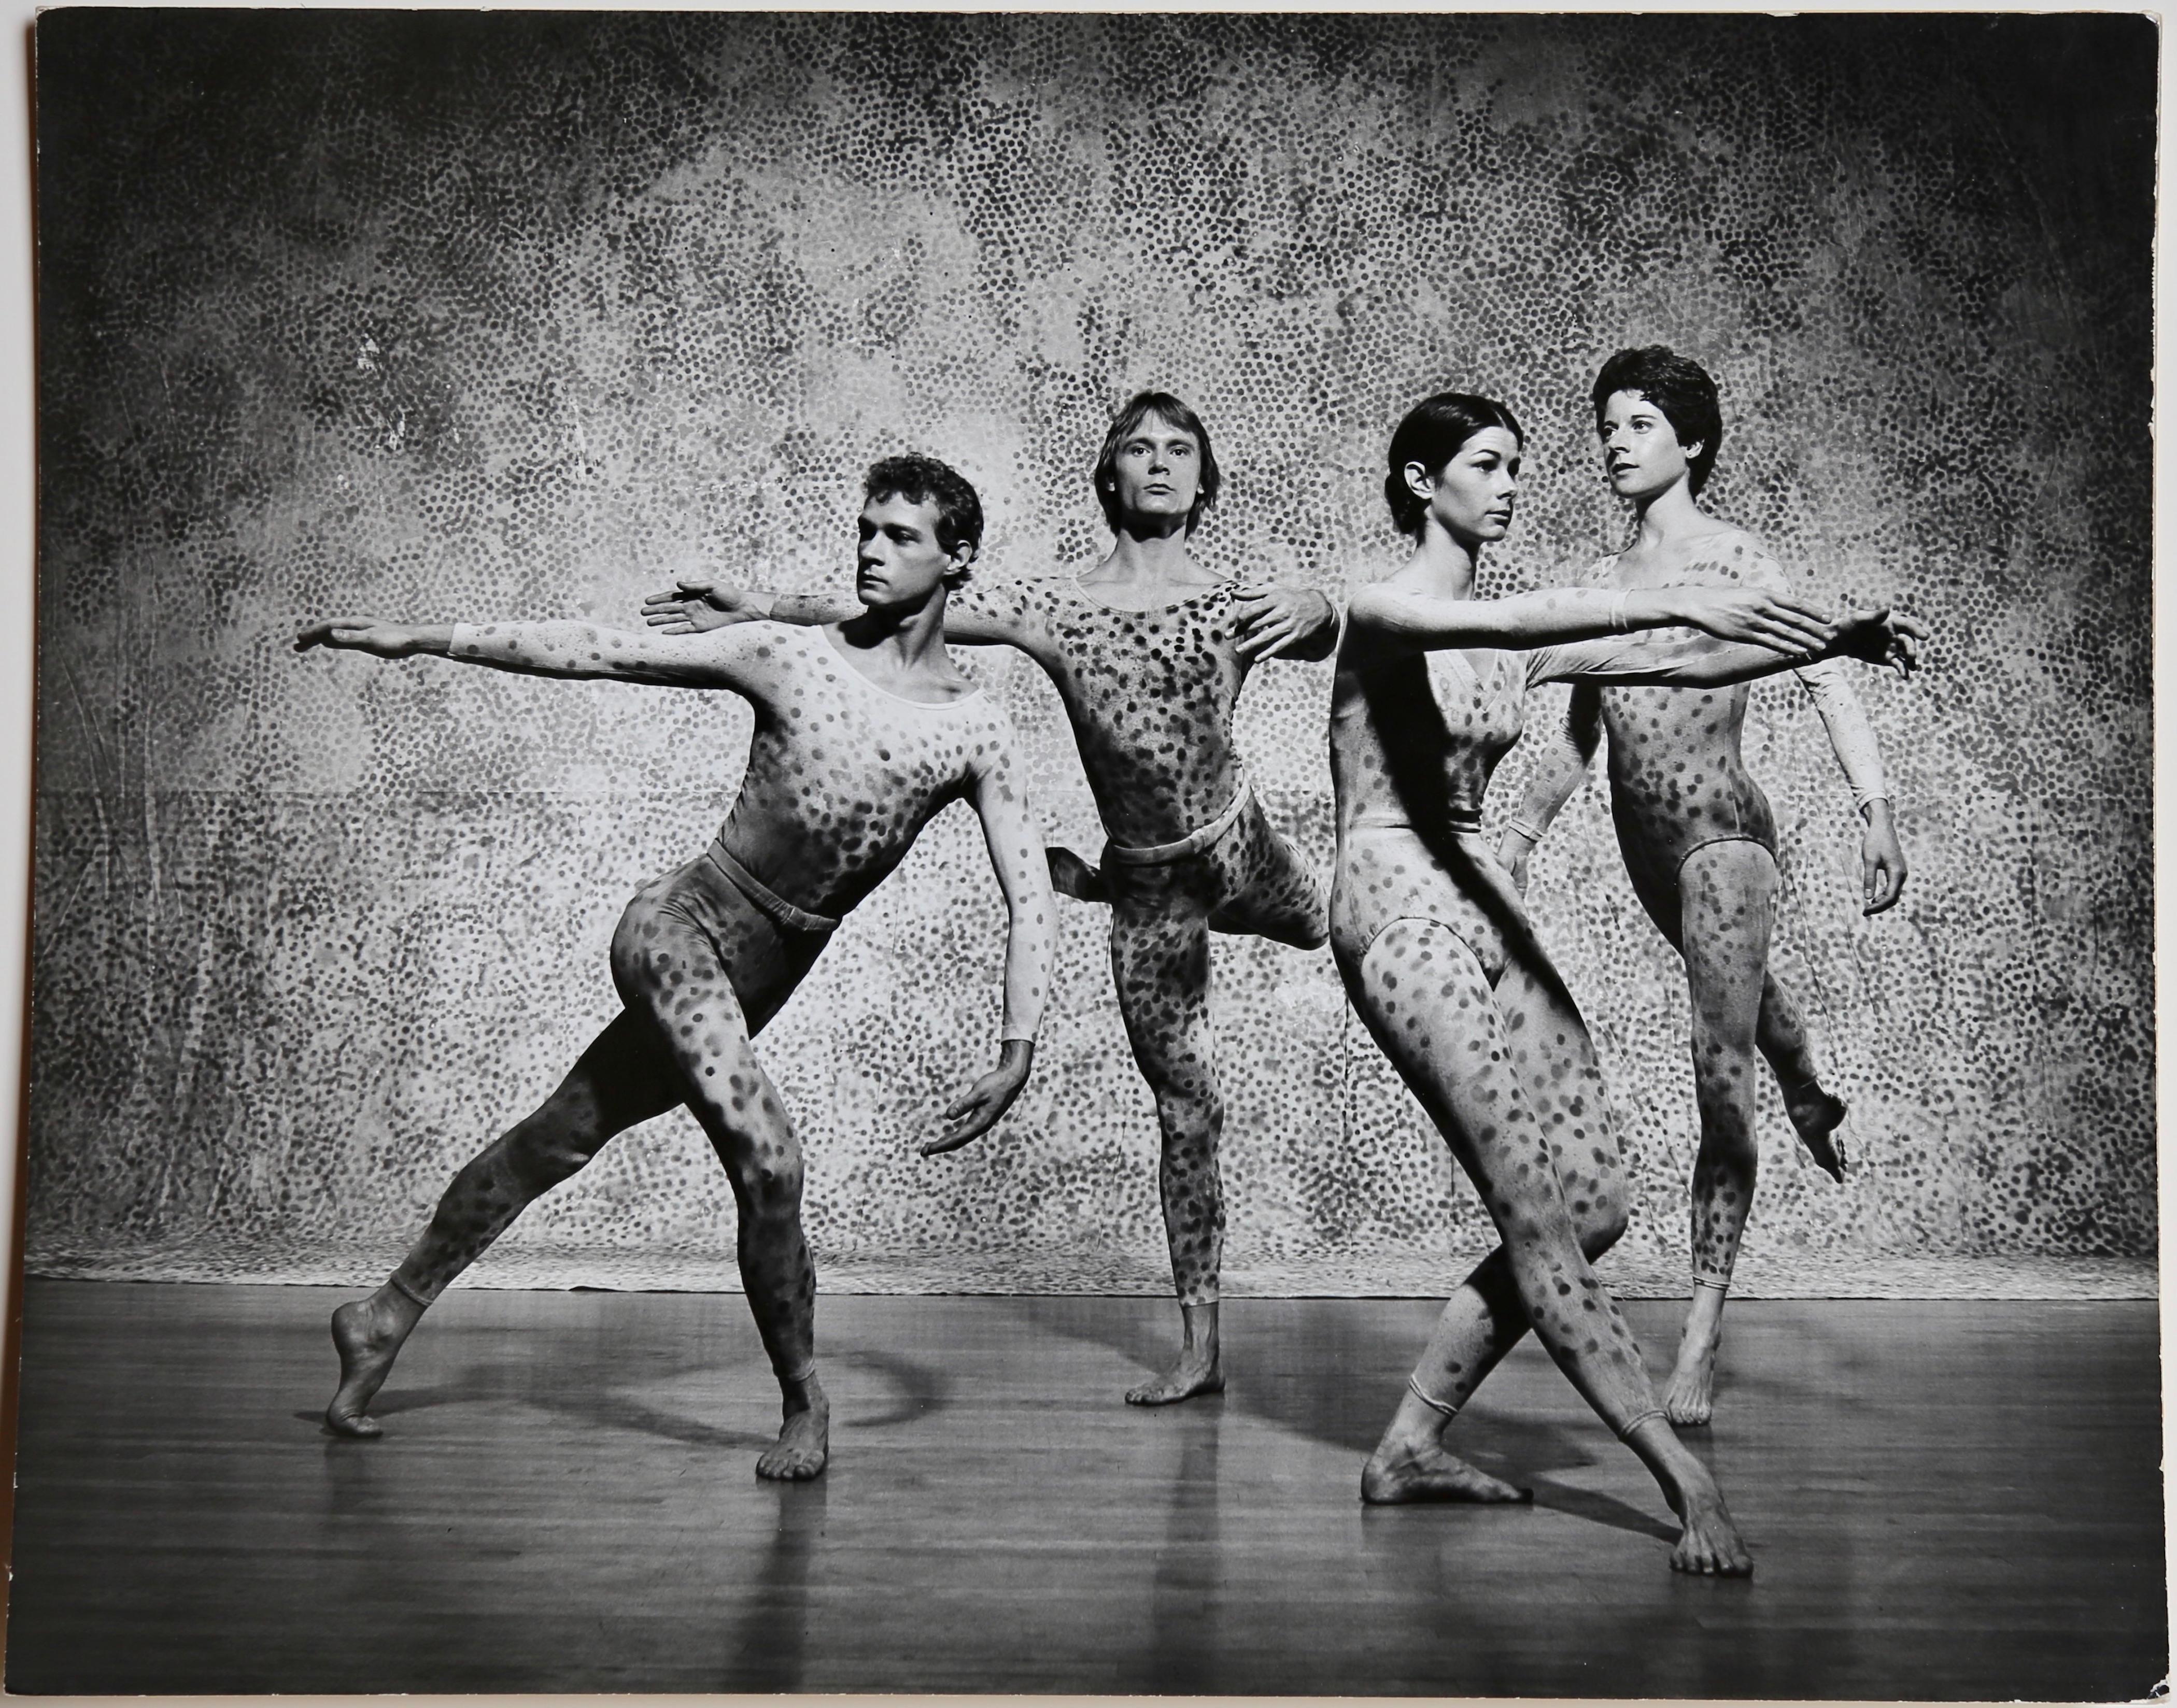 Jack Mitchell signed vintage mid-20th Century photograph of the Mere Cunningham Dance Company in "Summerspace" by the iconic modern dance choreographer Merce Cunningham. "Summerscape" was one of Cunningham's signature ballets. Photo taken in 1975.